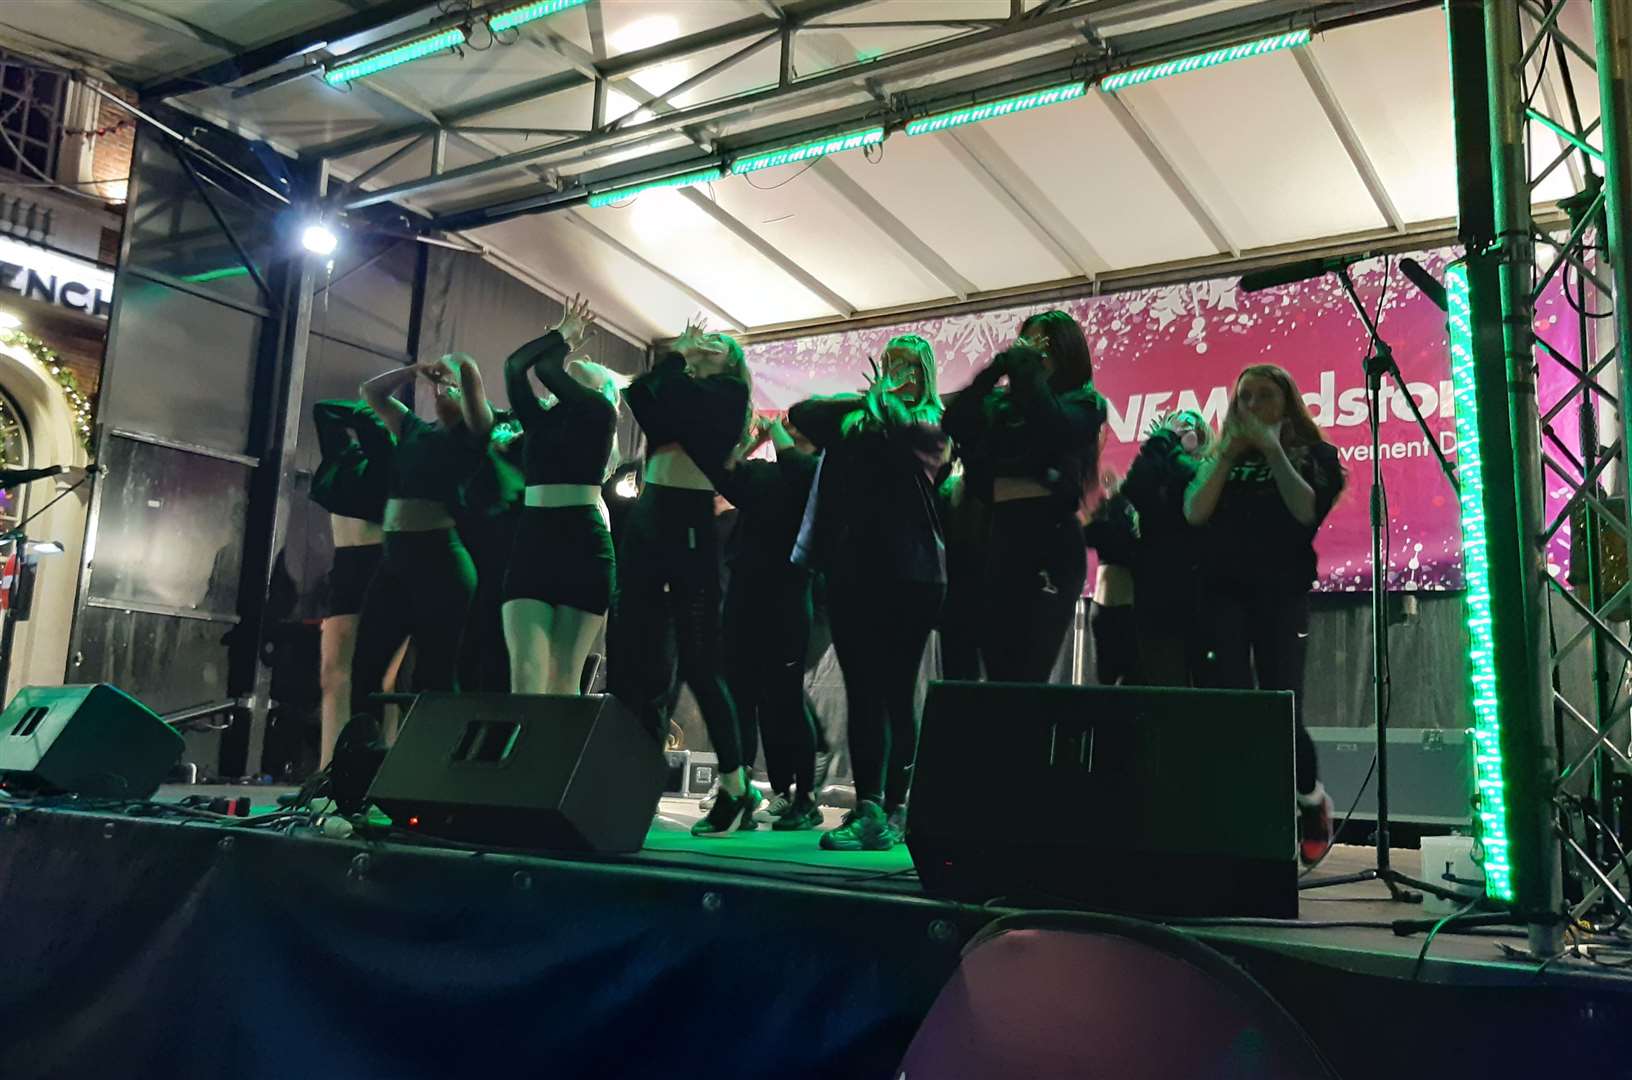 The Hazlitt Dance Company performing at the Maidstone Christmas lights switch on 2021